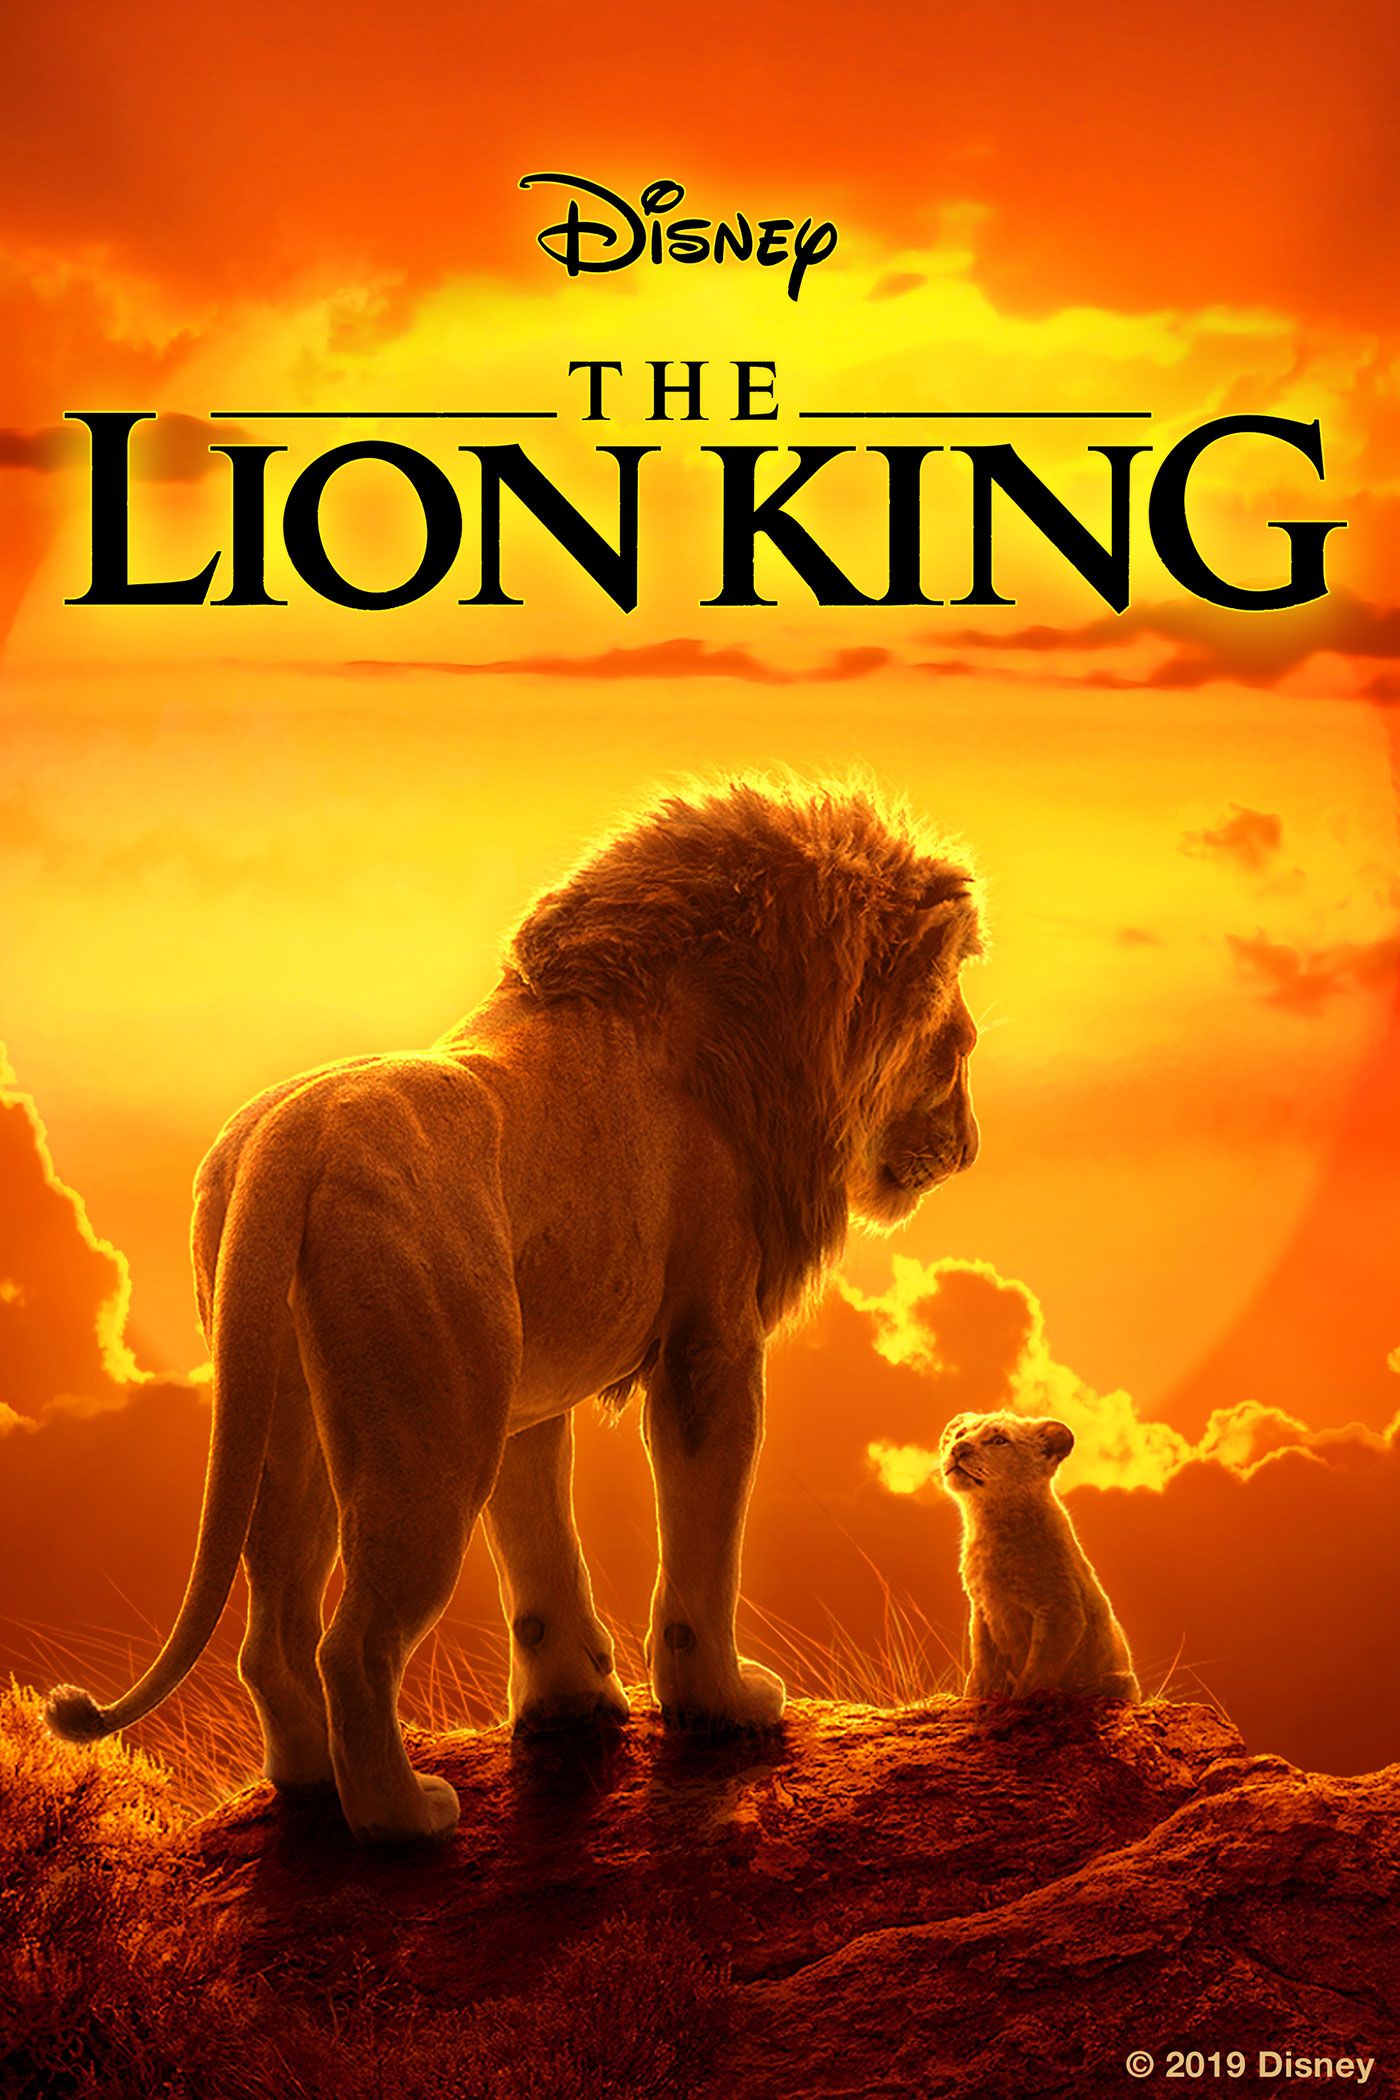 lionking coupon codes, promo codes and deals